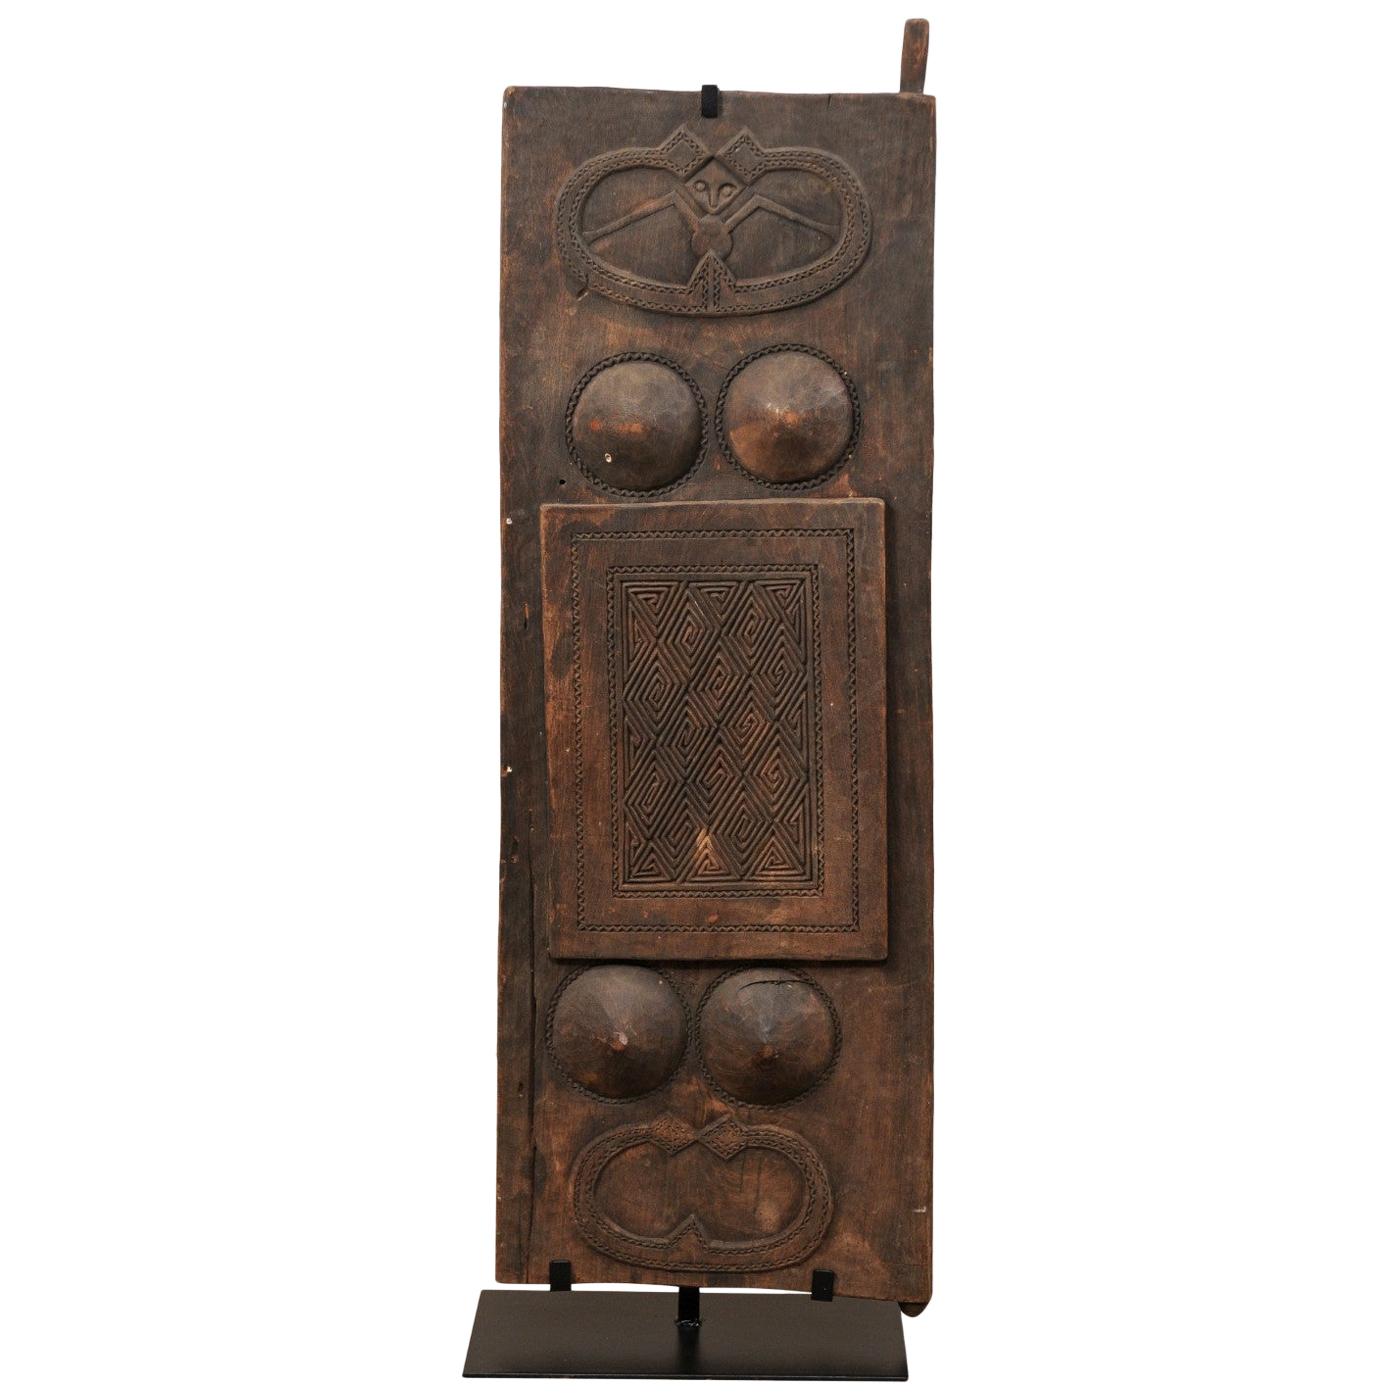 Early 20th Century Carved Wood Tribal Panel from Timor Island, Indonesia